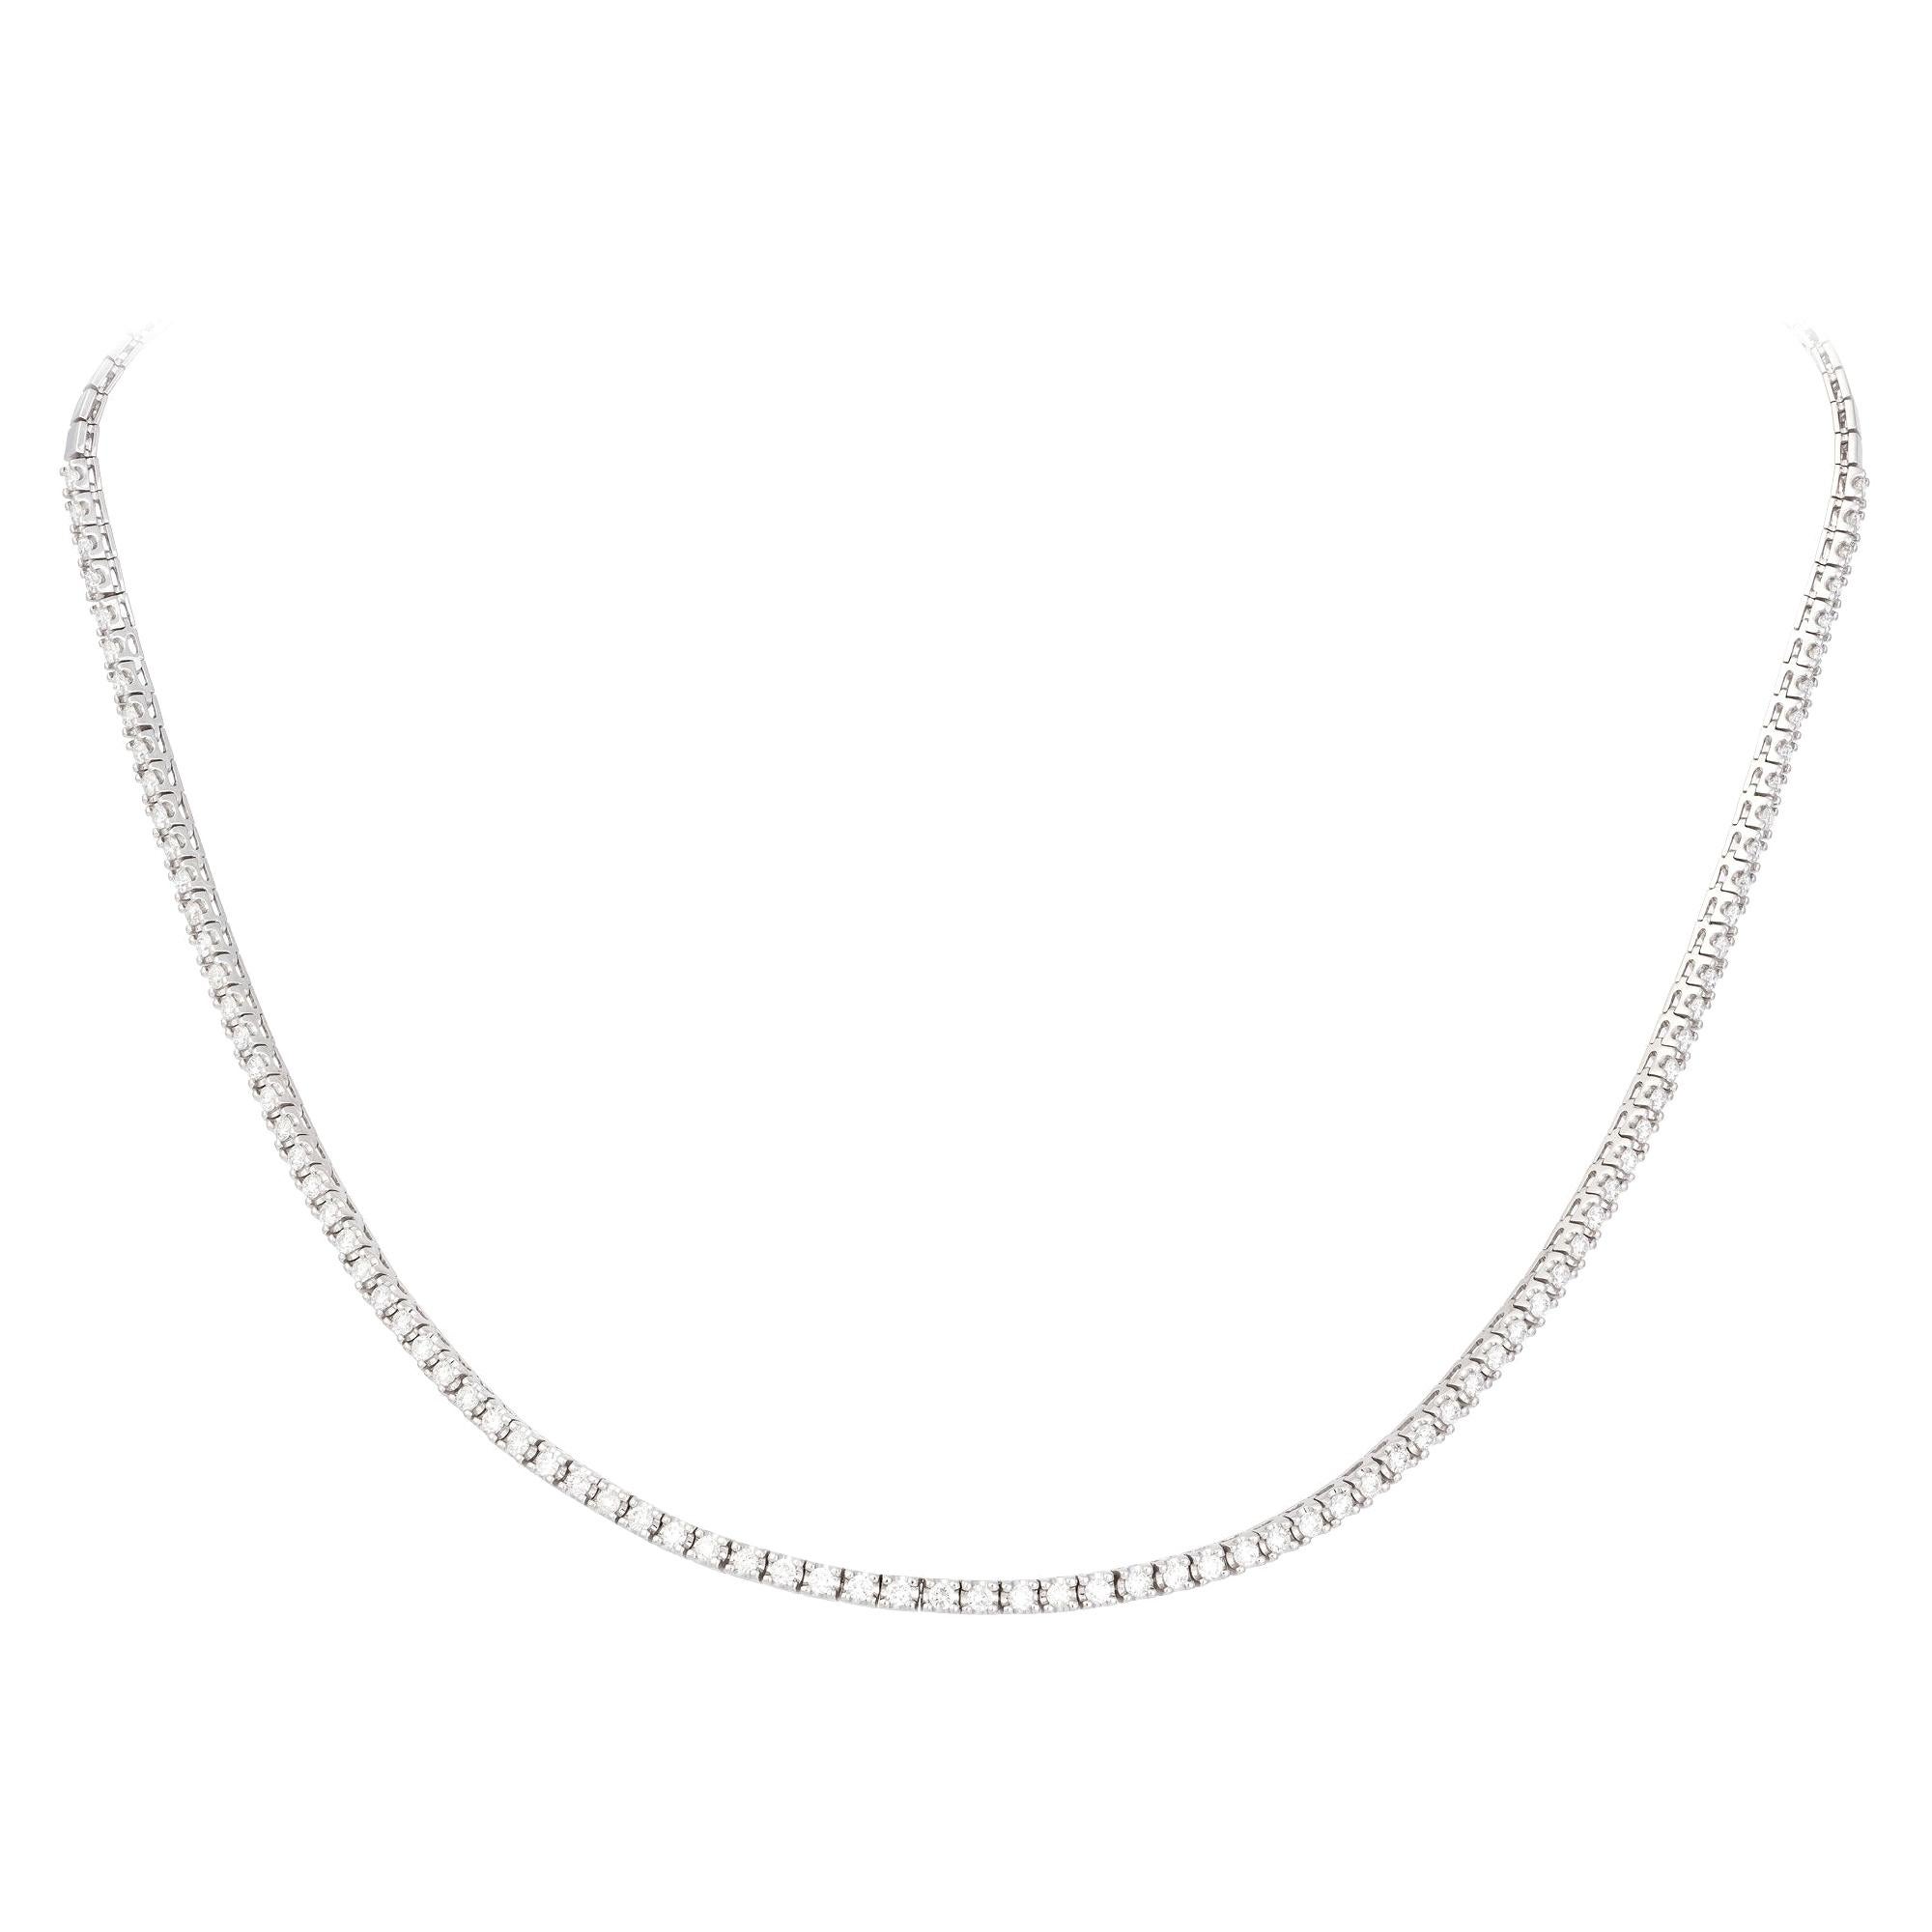 Best Seller Classic Style Diamond Necklace 18k White Gold for Her For Sale